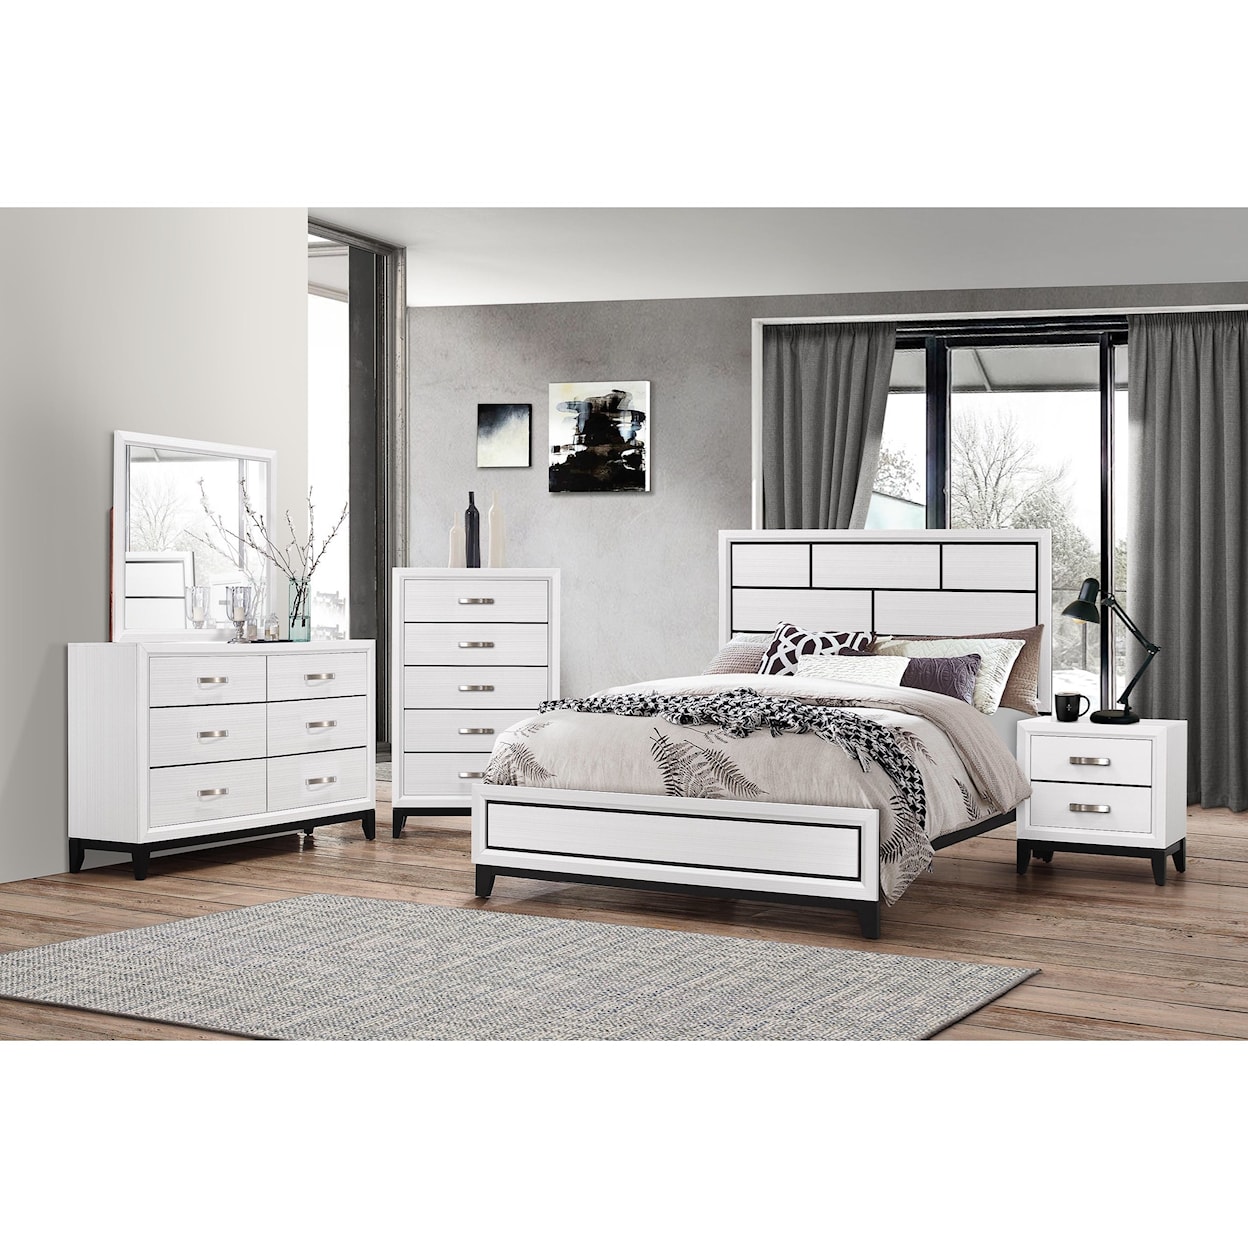 CM Akerson California King Bedroom Group